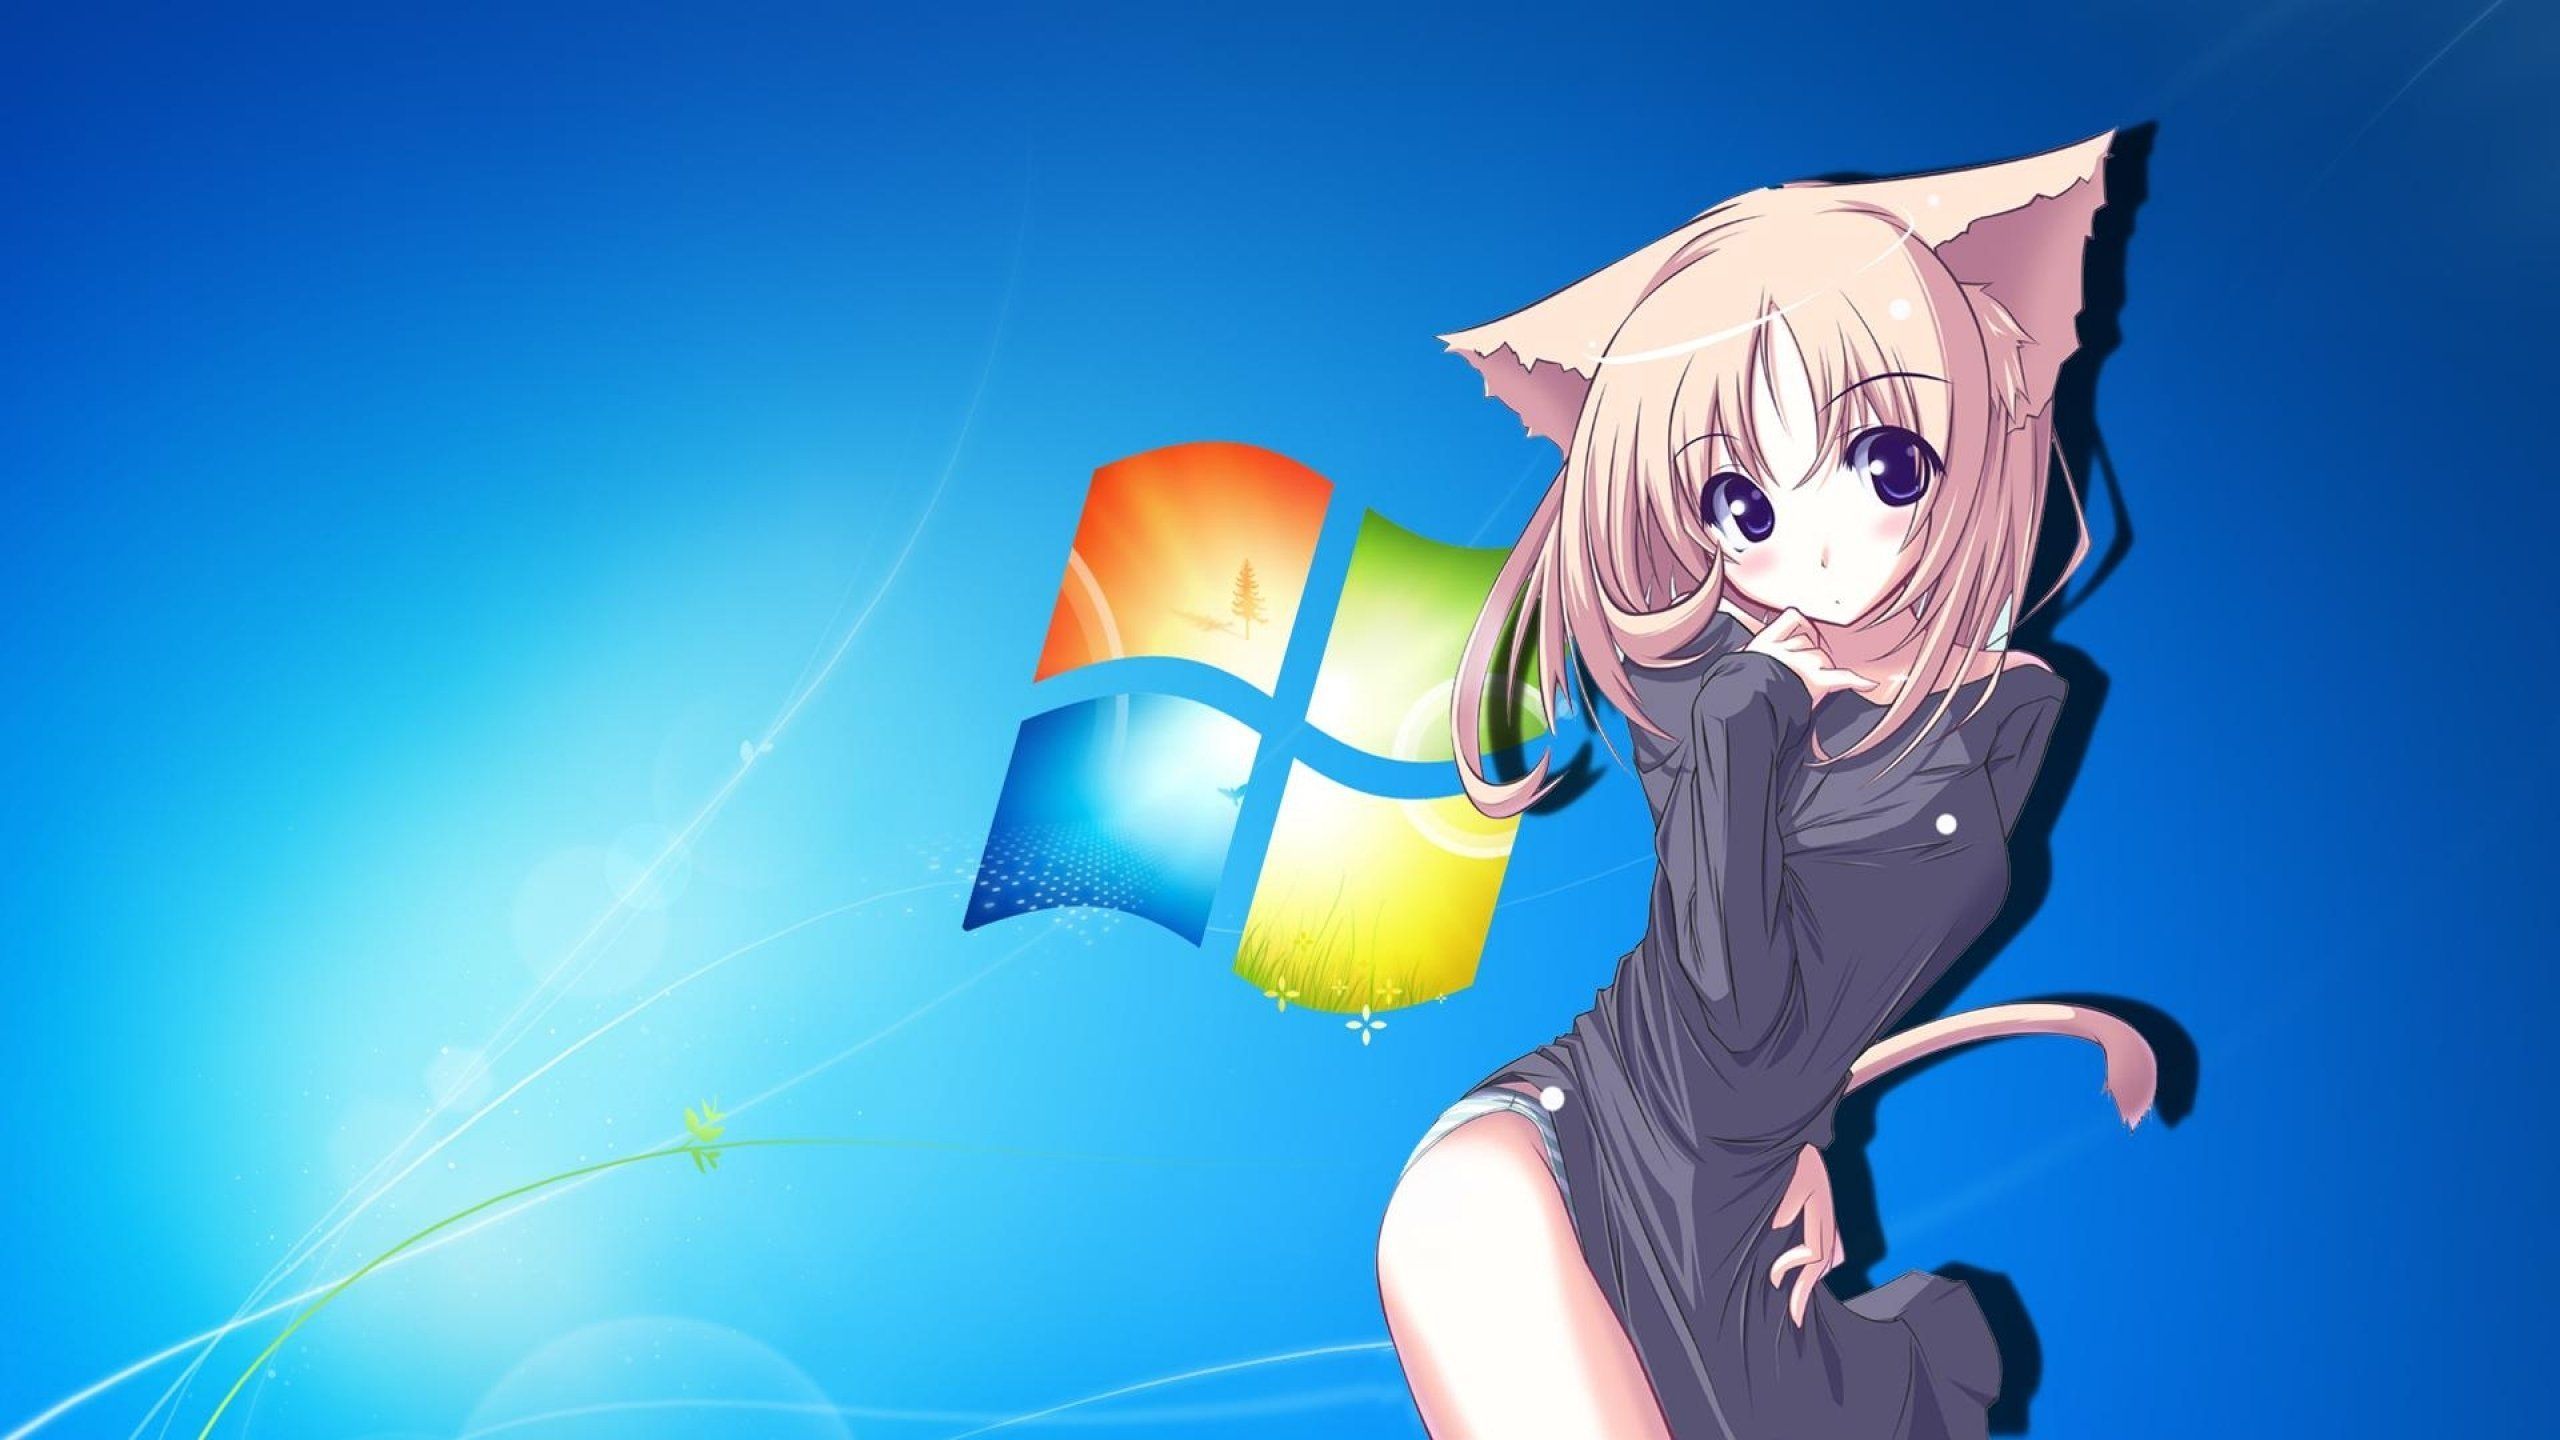 Anime cat girl with windows7 background wallpaper 2560x1440